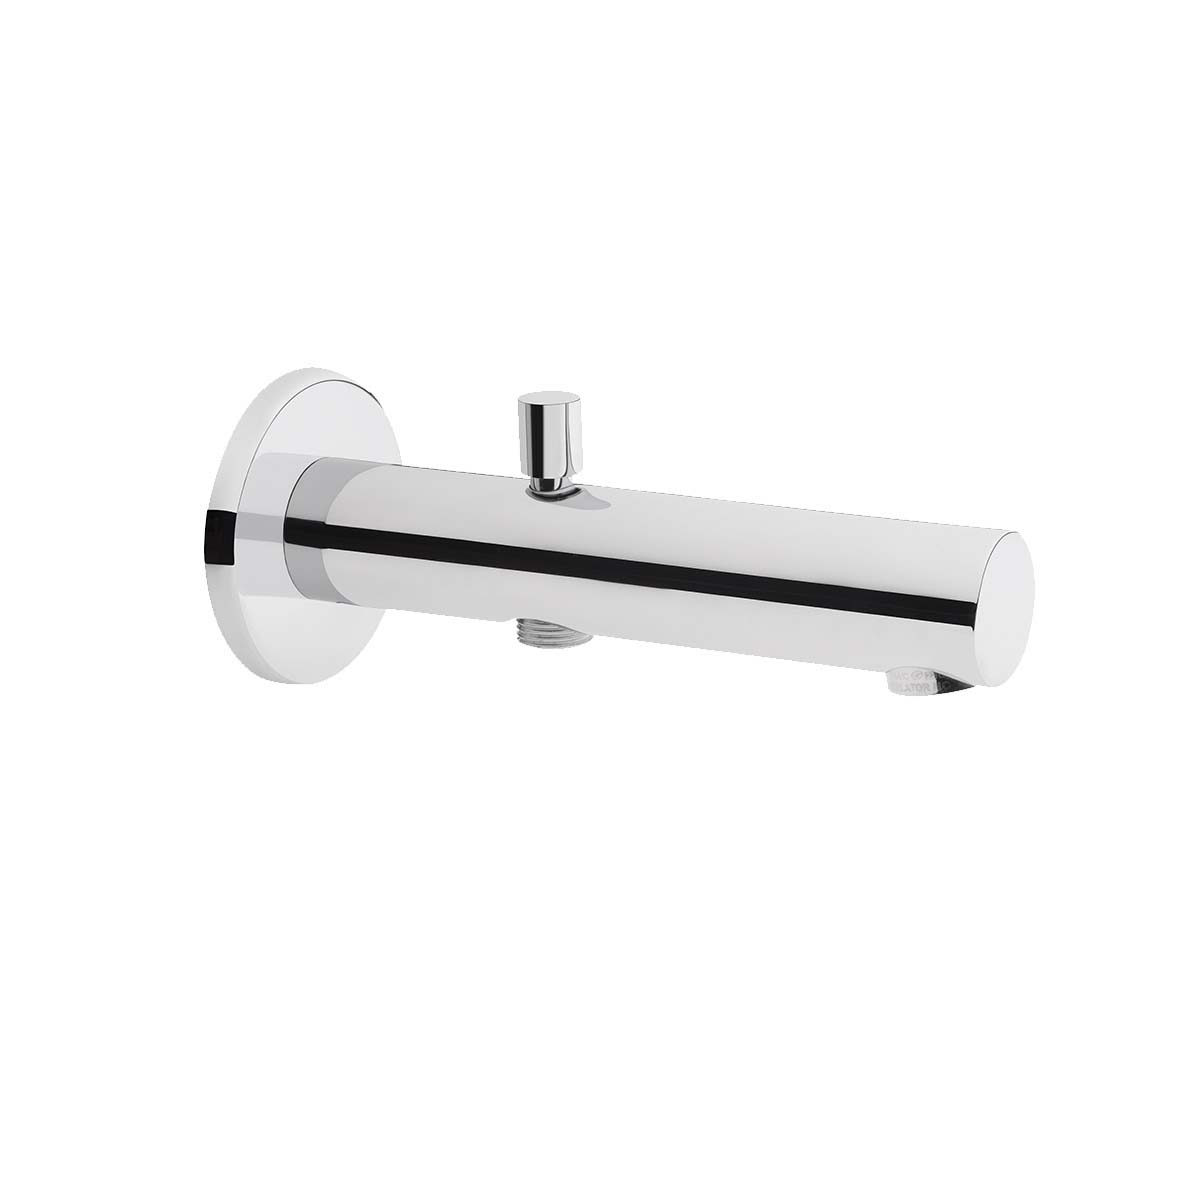 Bath spout (with handshower outlet)